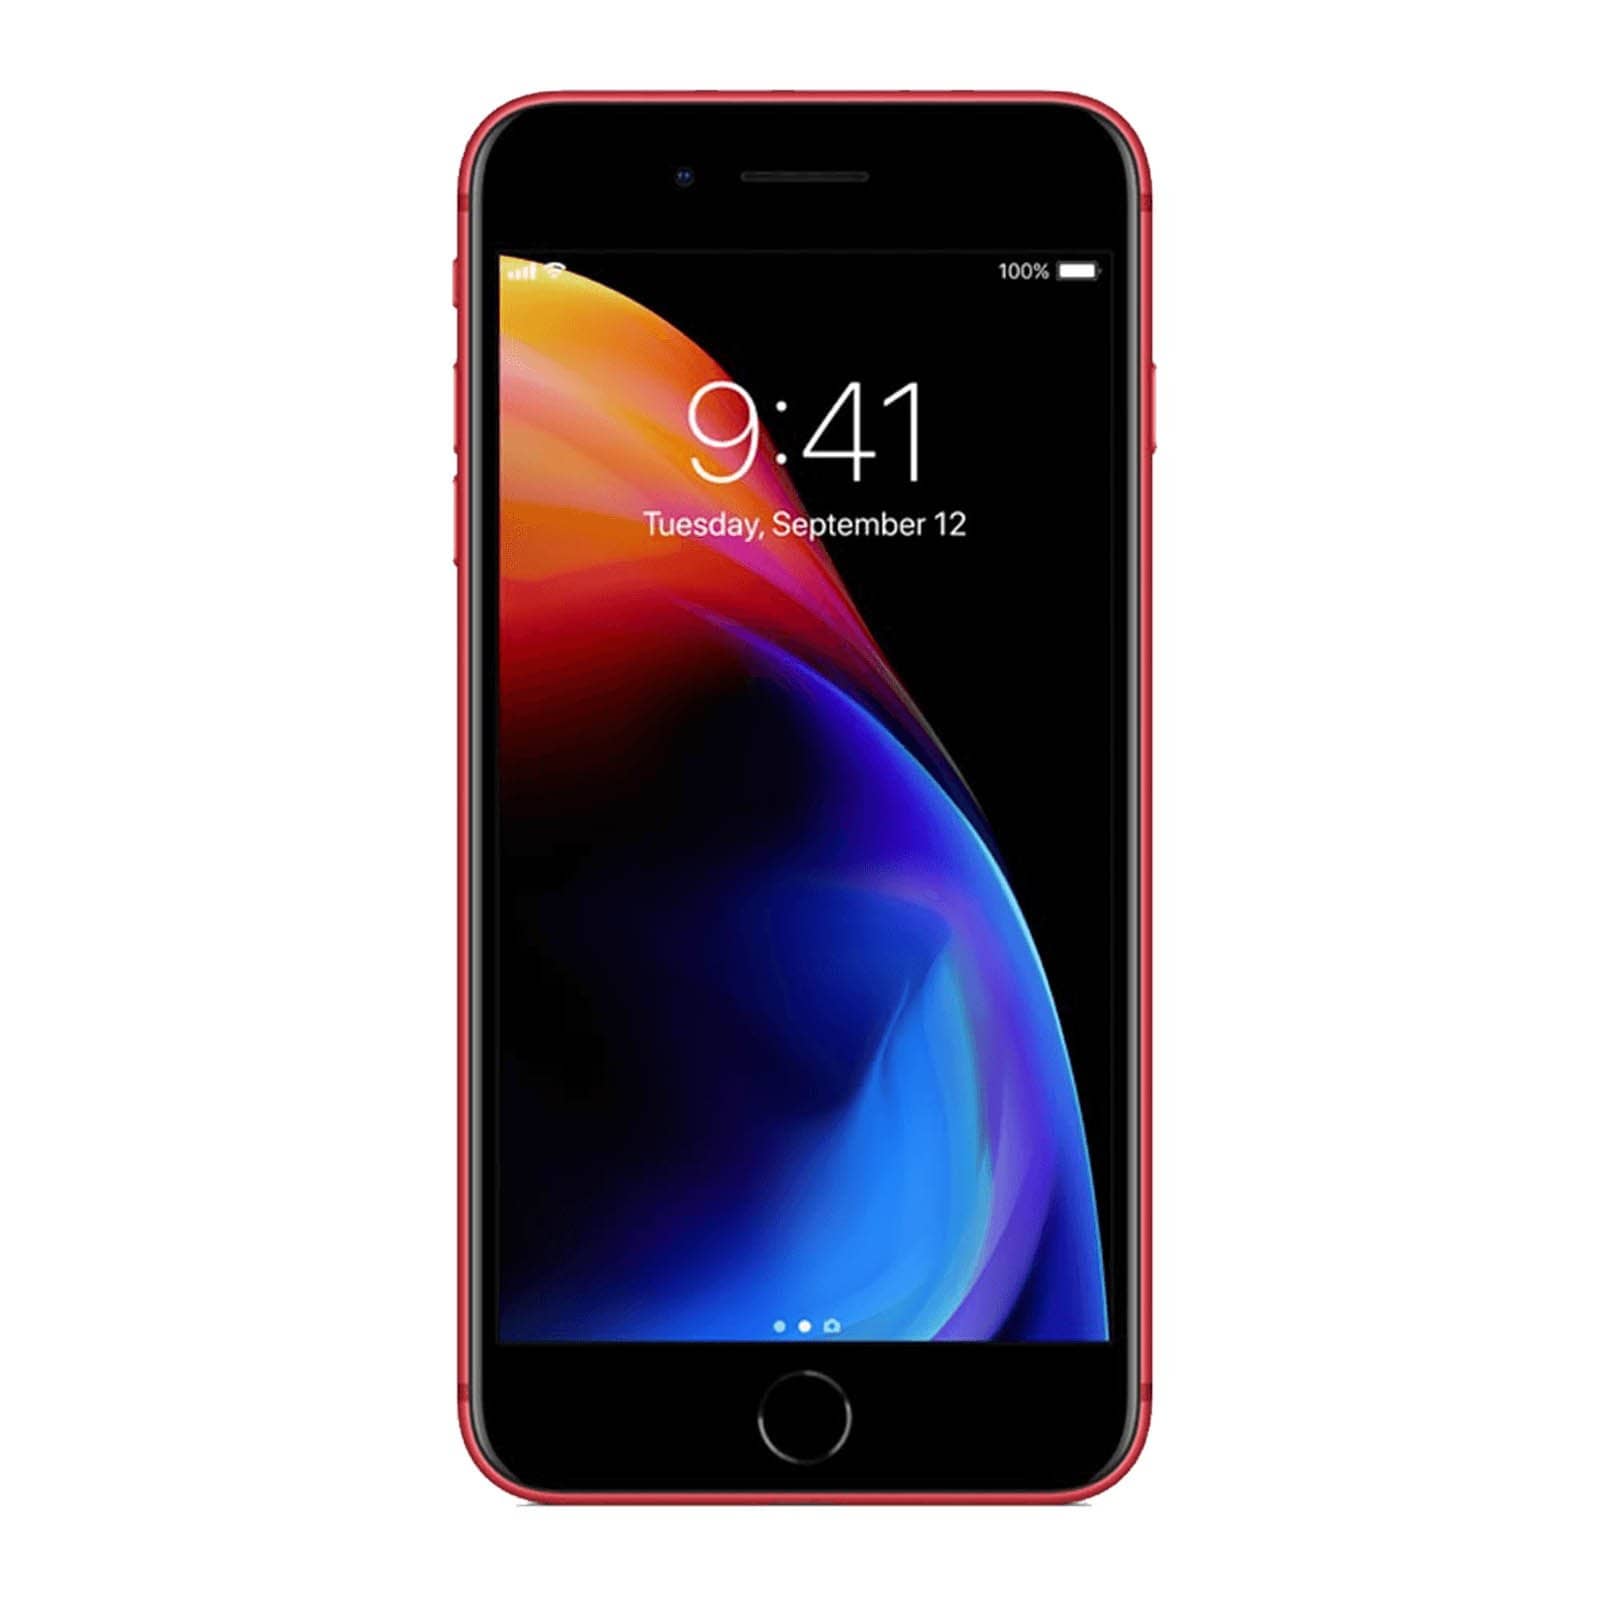 Apple iPhone 8 256GB Product Red Good - Unlocked